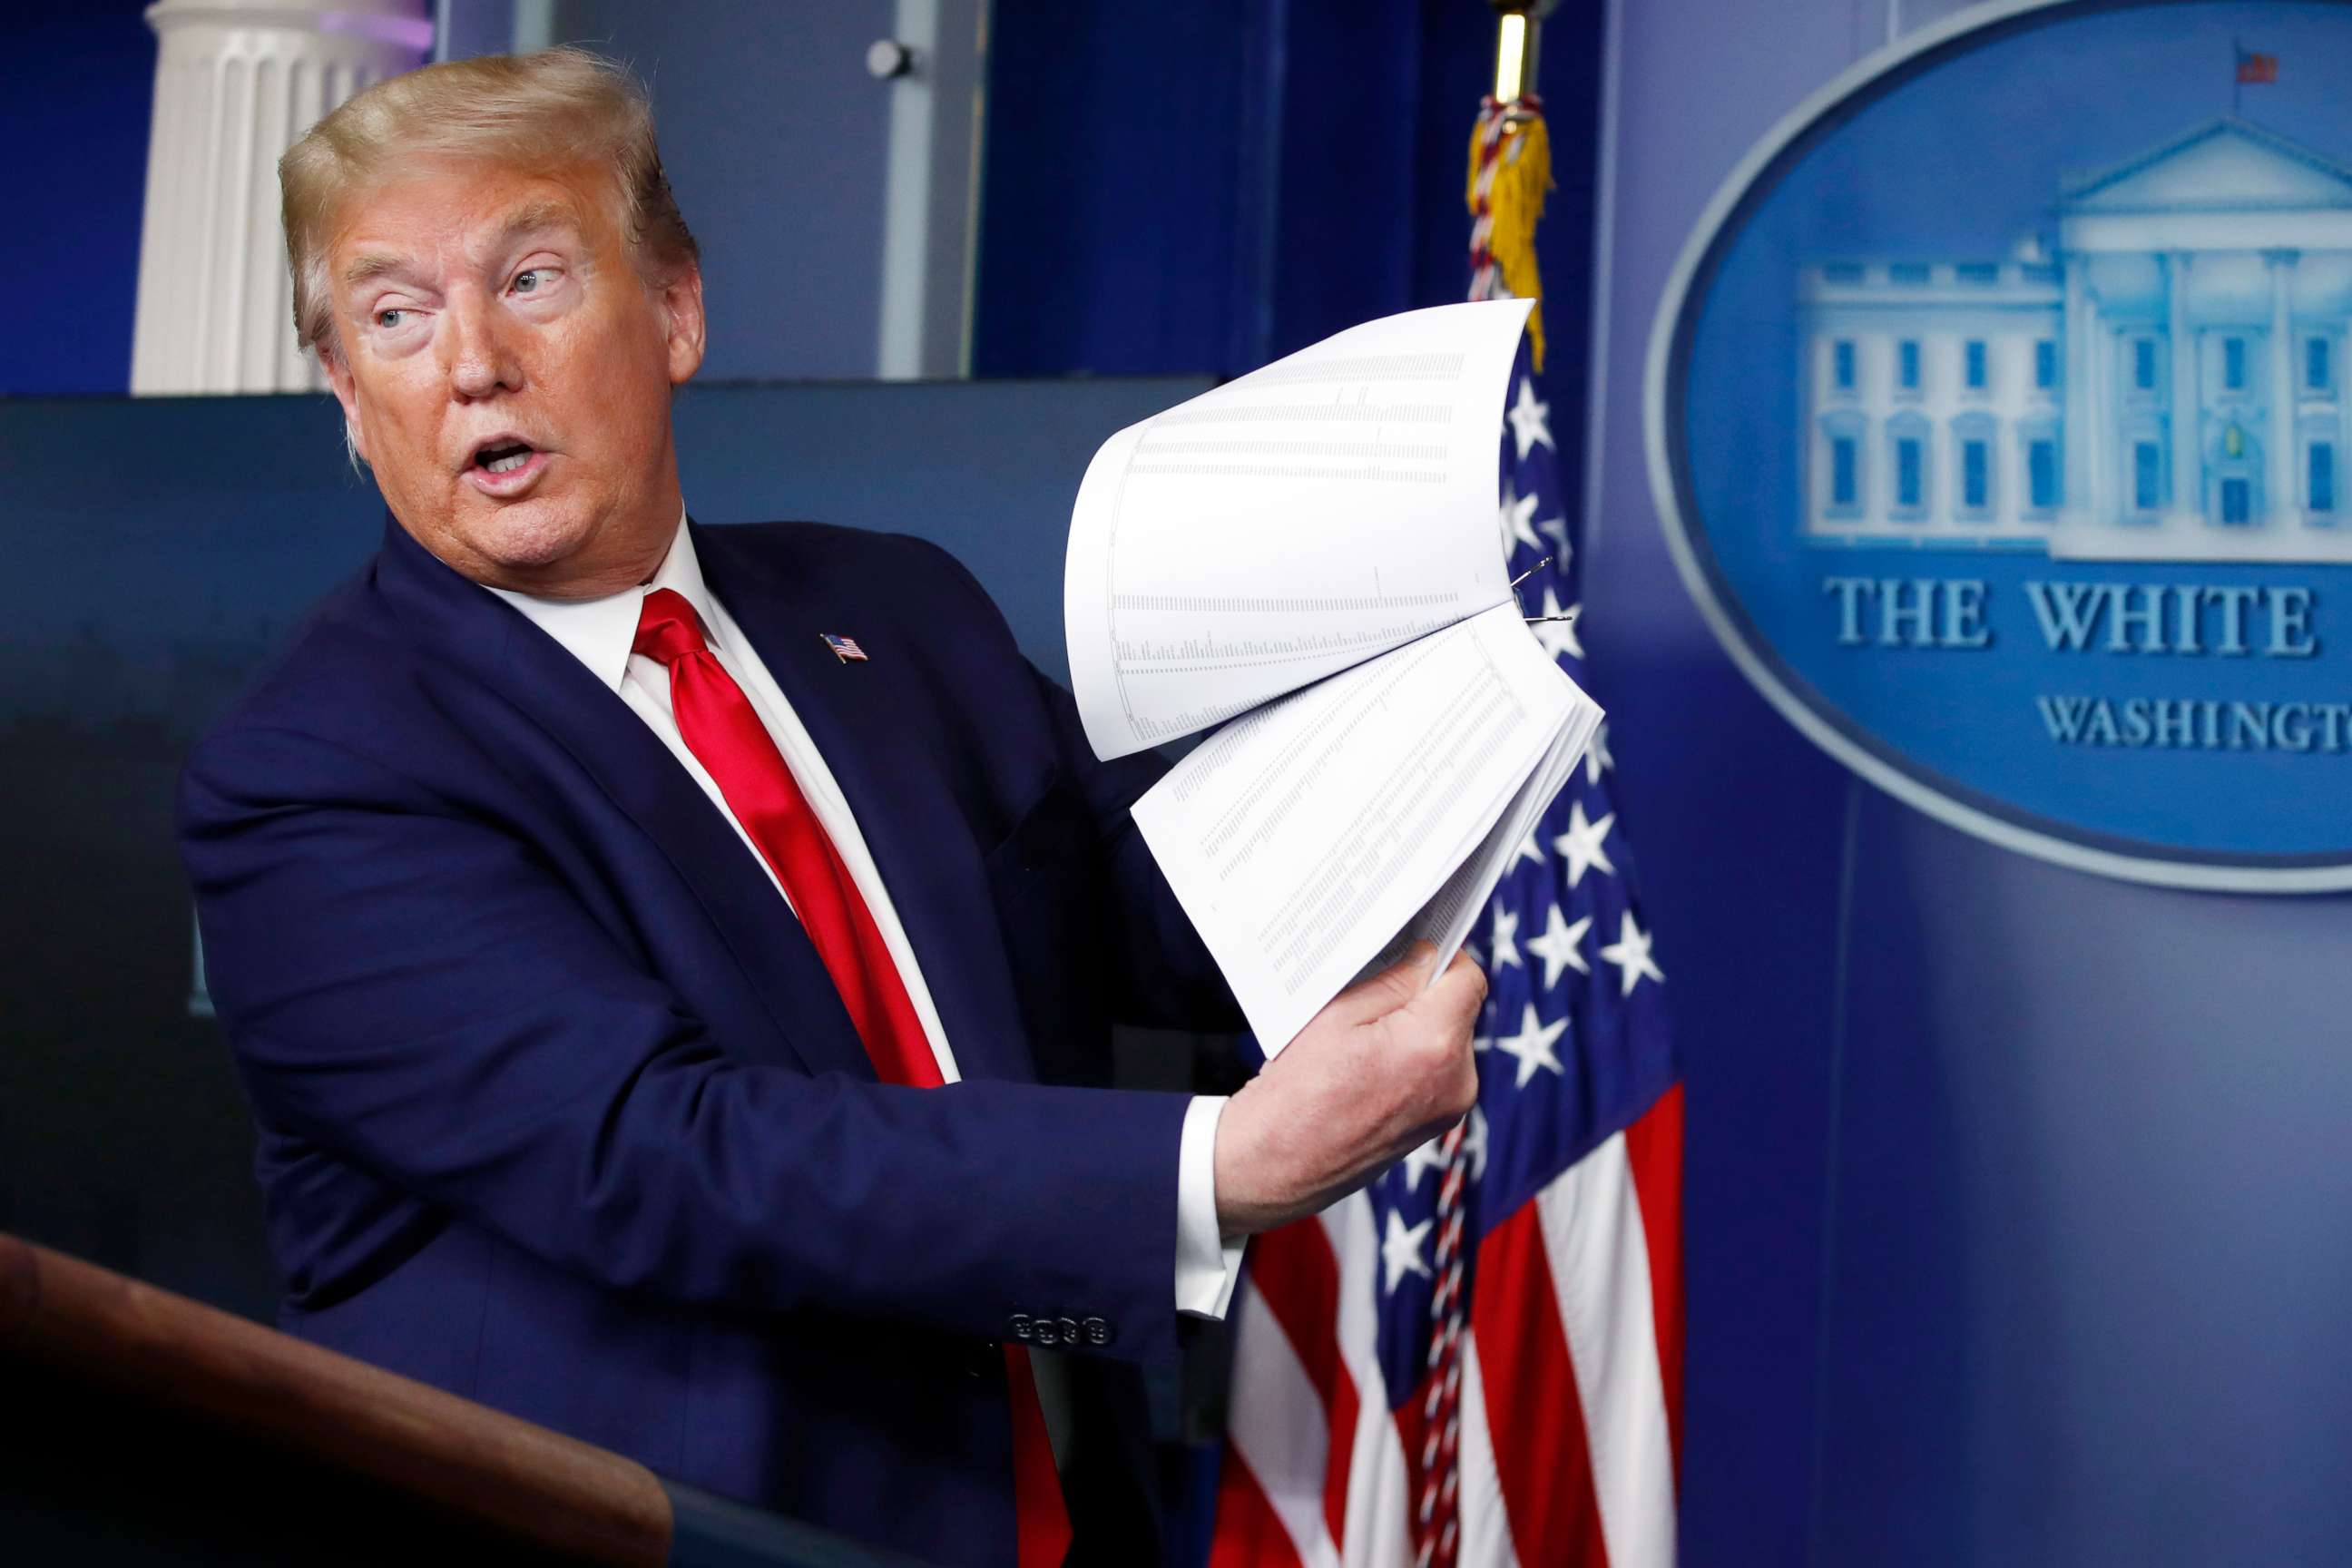 PHOTO: President Donald Trump holds up papers as he speaks about the coronavirus in the James Brady Press Briefing Room of the White House, April 20, 2020, in Washington.